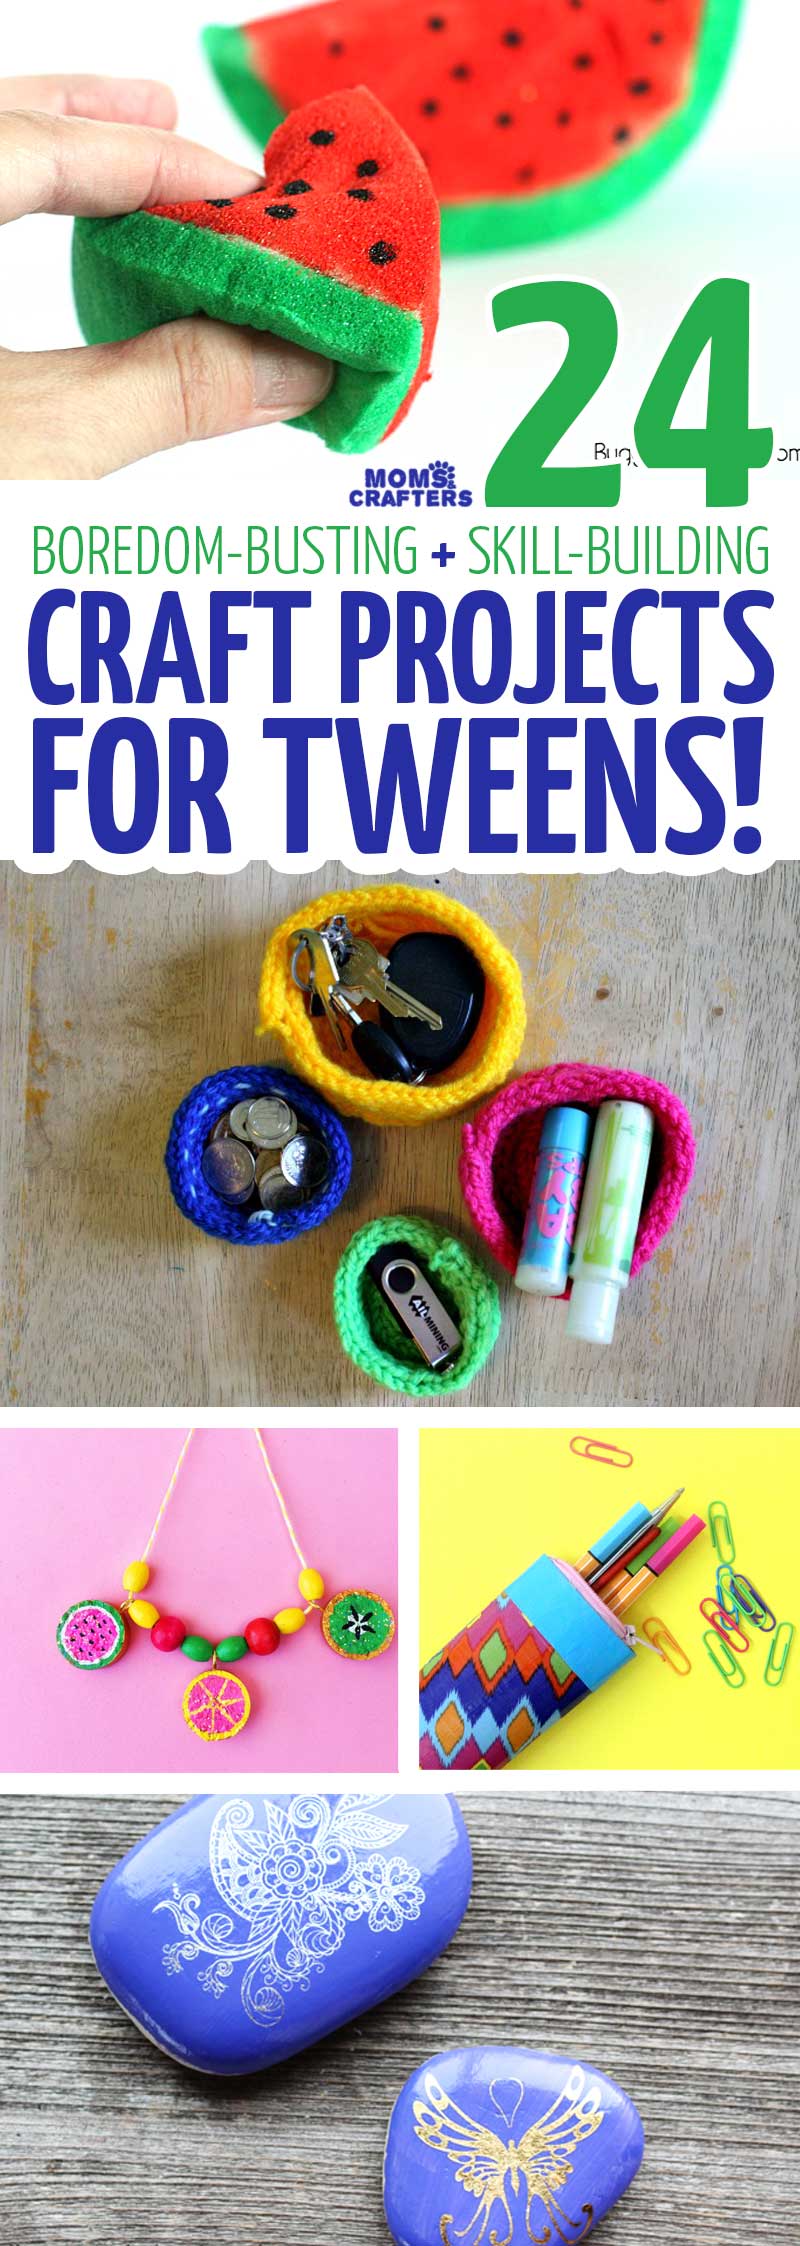 30 Fun Crafts for 12 Year Olds and Tweens - Craftsy Hacks